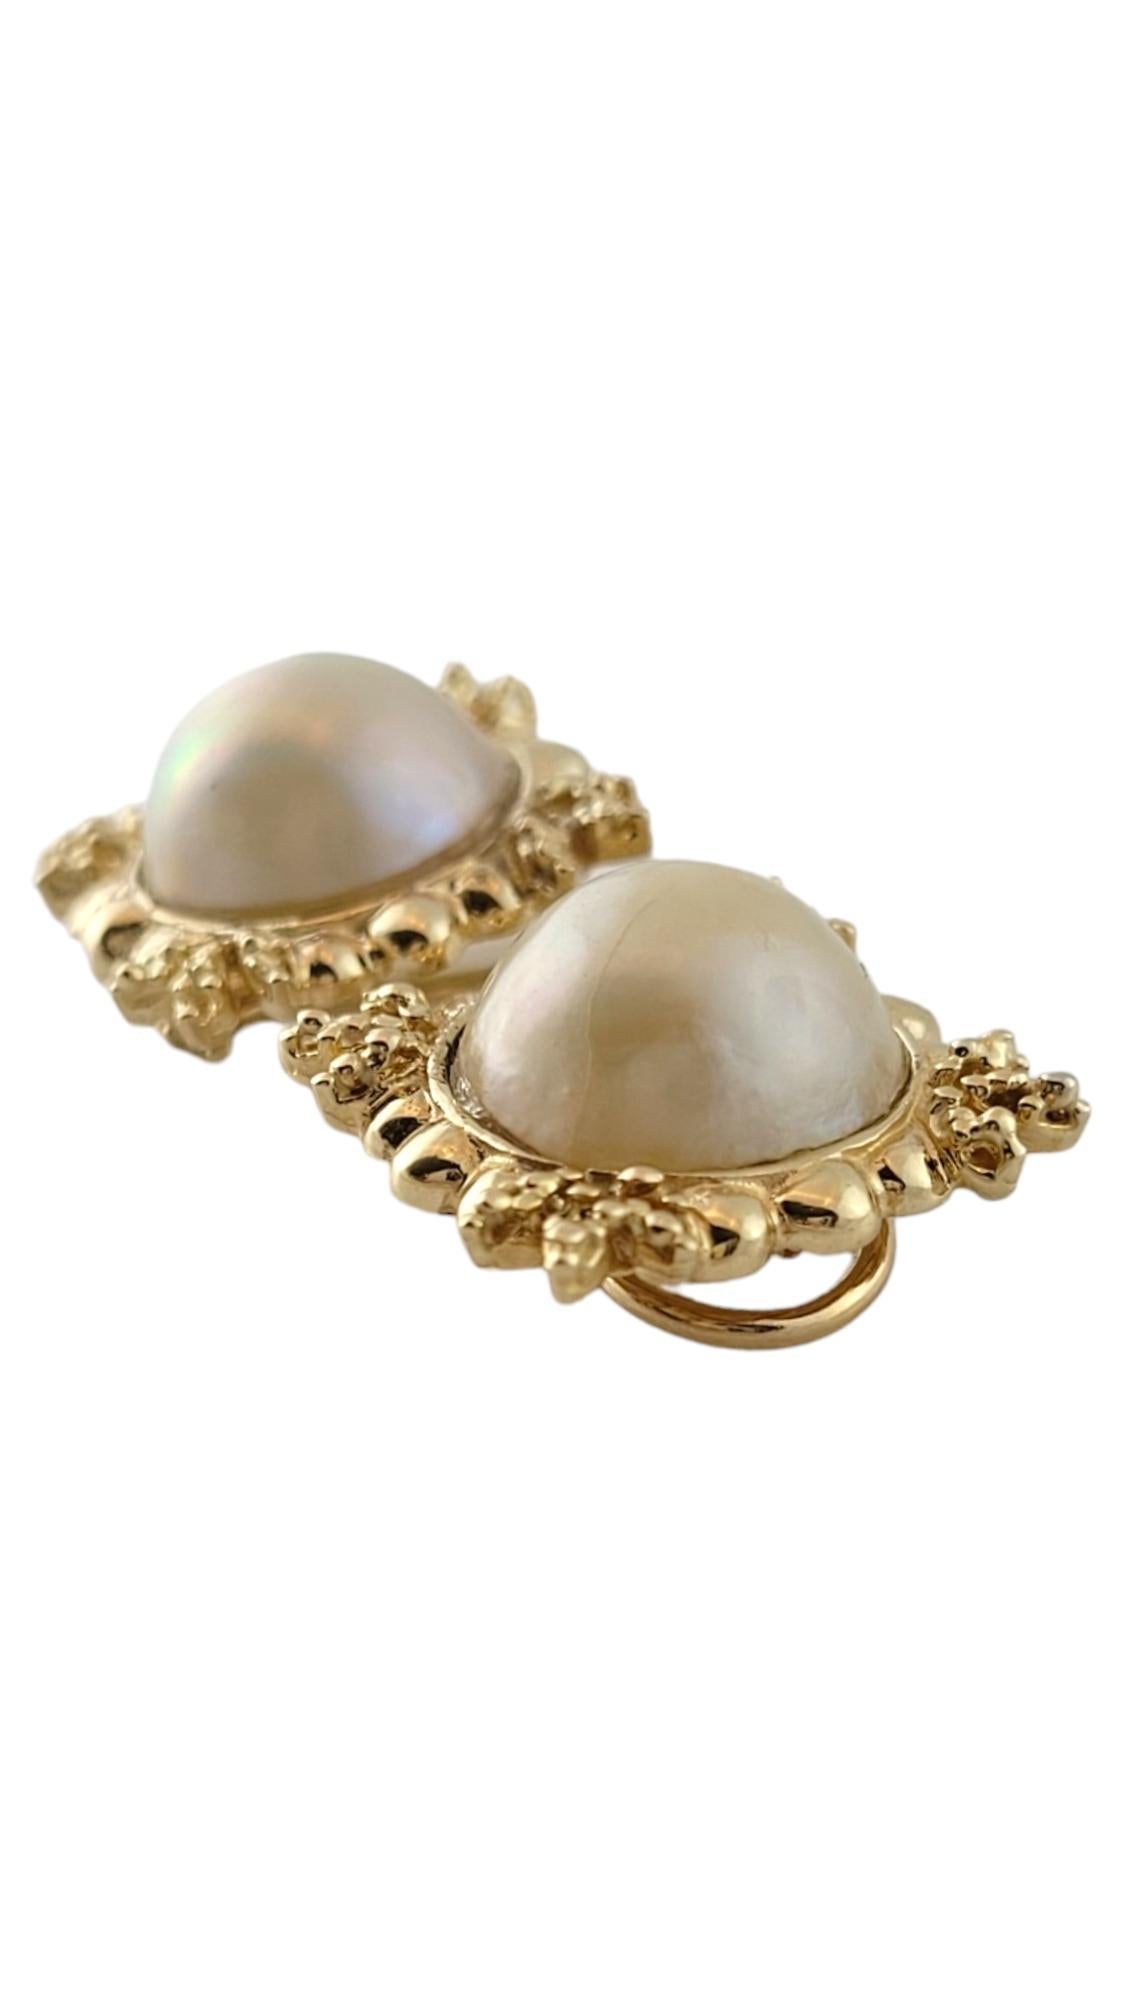 Vintage 14K Yellow Gold Mabe Pearl Clip-on Earrings

These gorgeous clip-on earrings are crafted with meticulous detail from 14K yellow gold and feature 2 beautiful Mabe pearls!

Pearls: 12.5mm each

Size: 20.11mm X 19.54mm X 8.89mm

Weight: 6.3